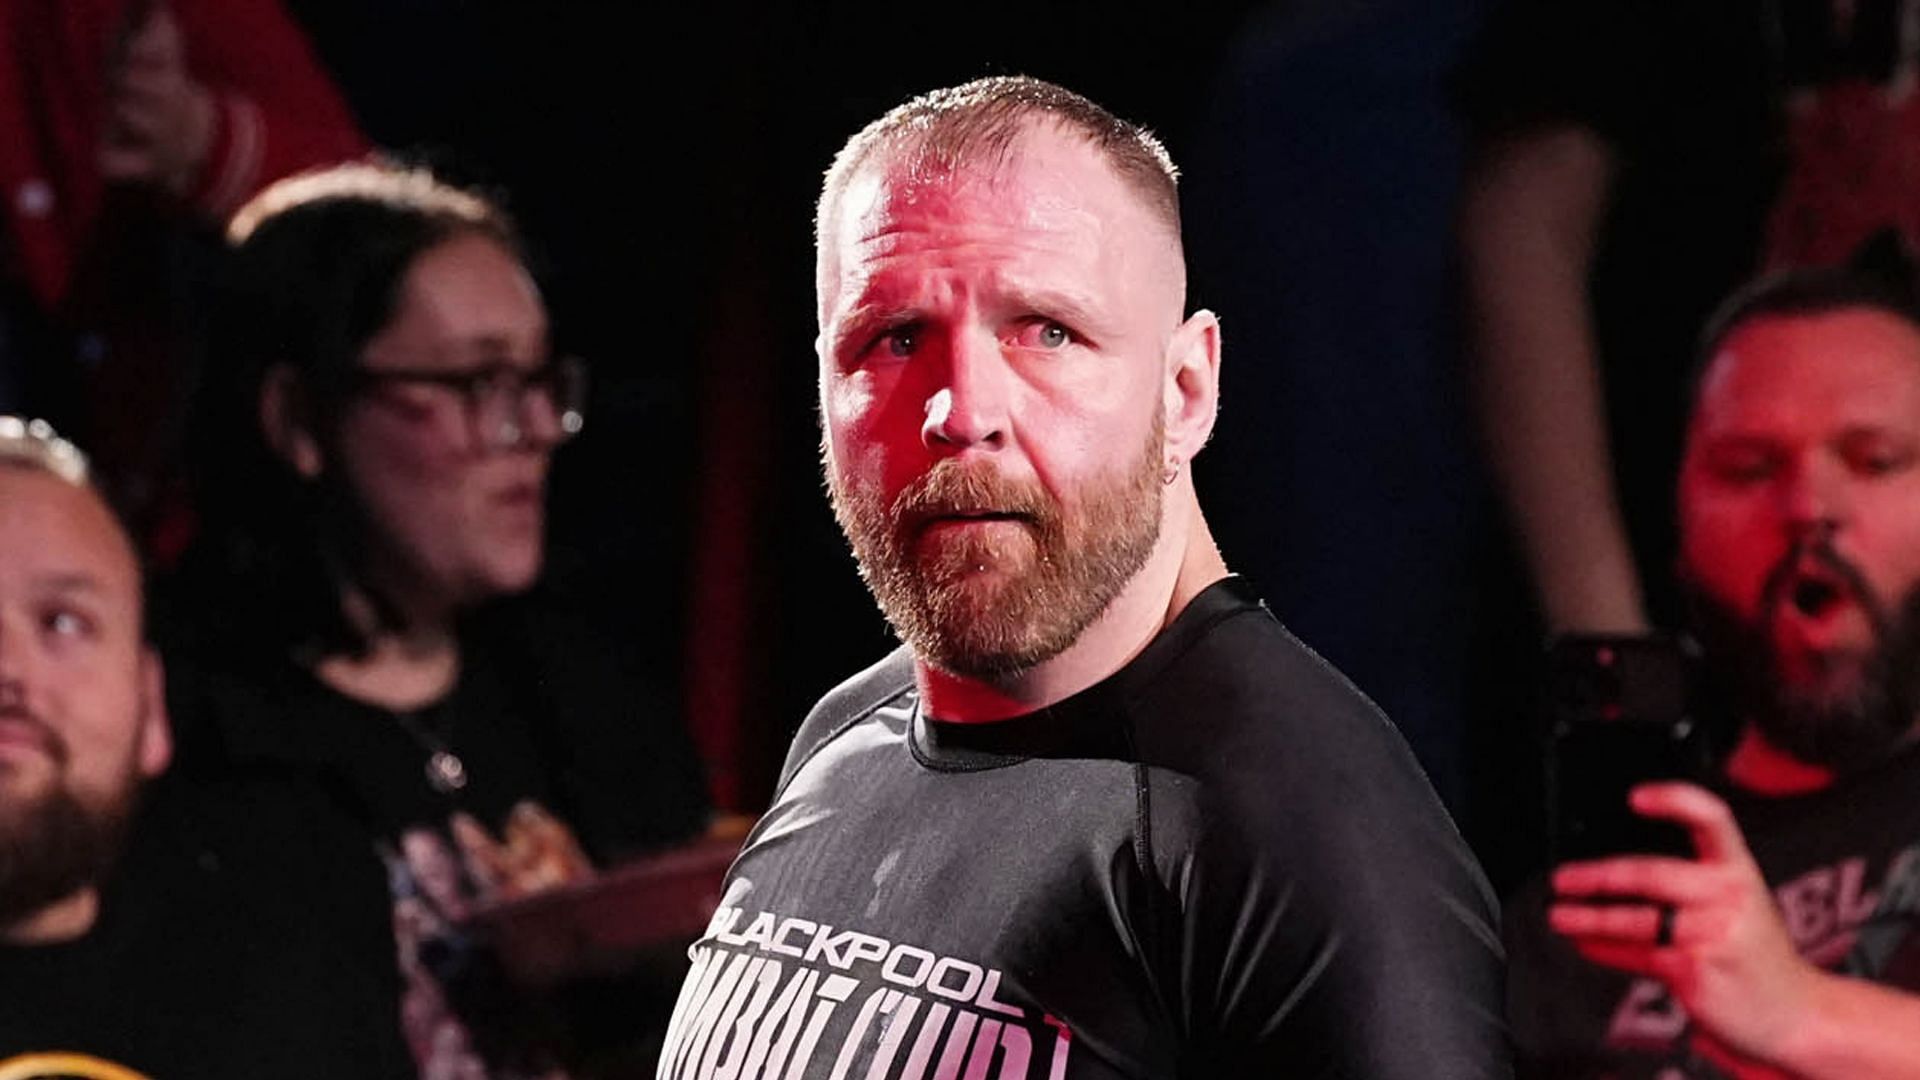 Moxley is one of the biggest stars in wrestling (image credit: All Elite Wrestling)